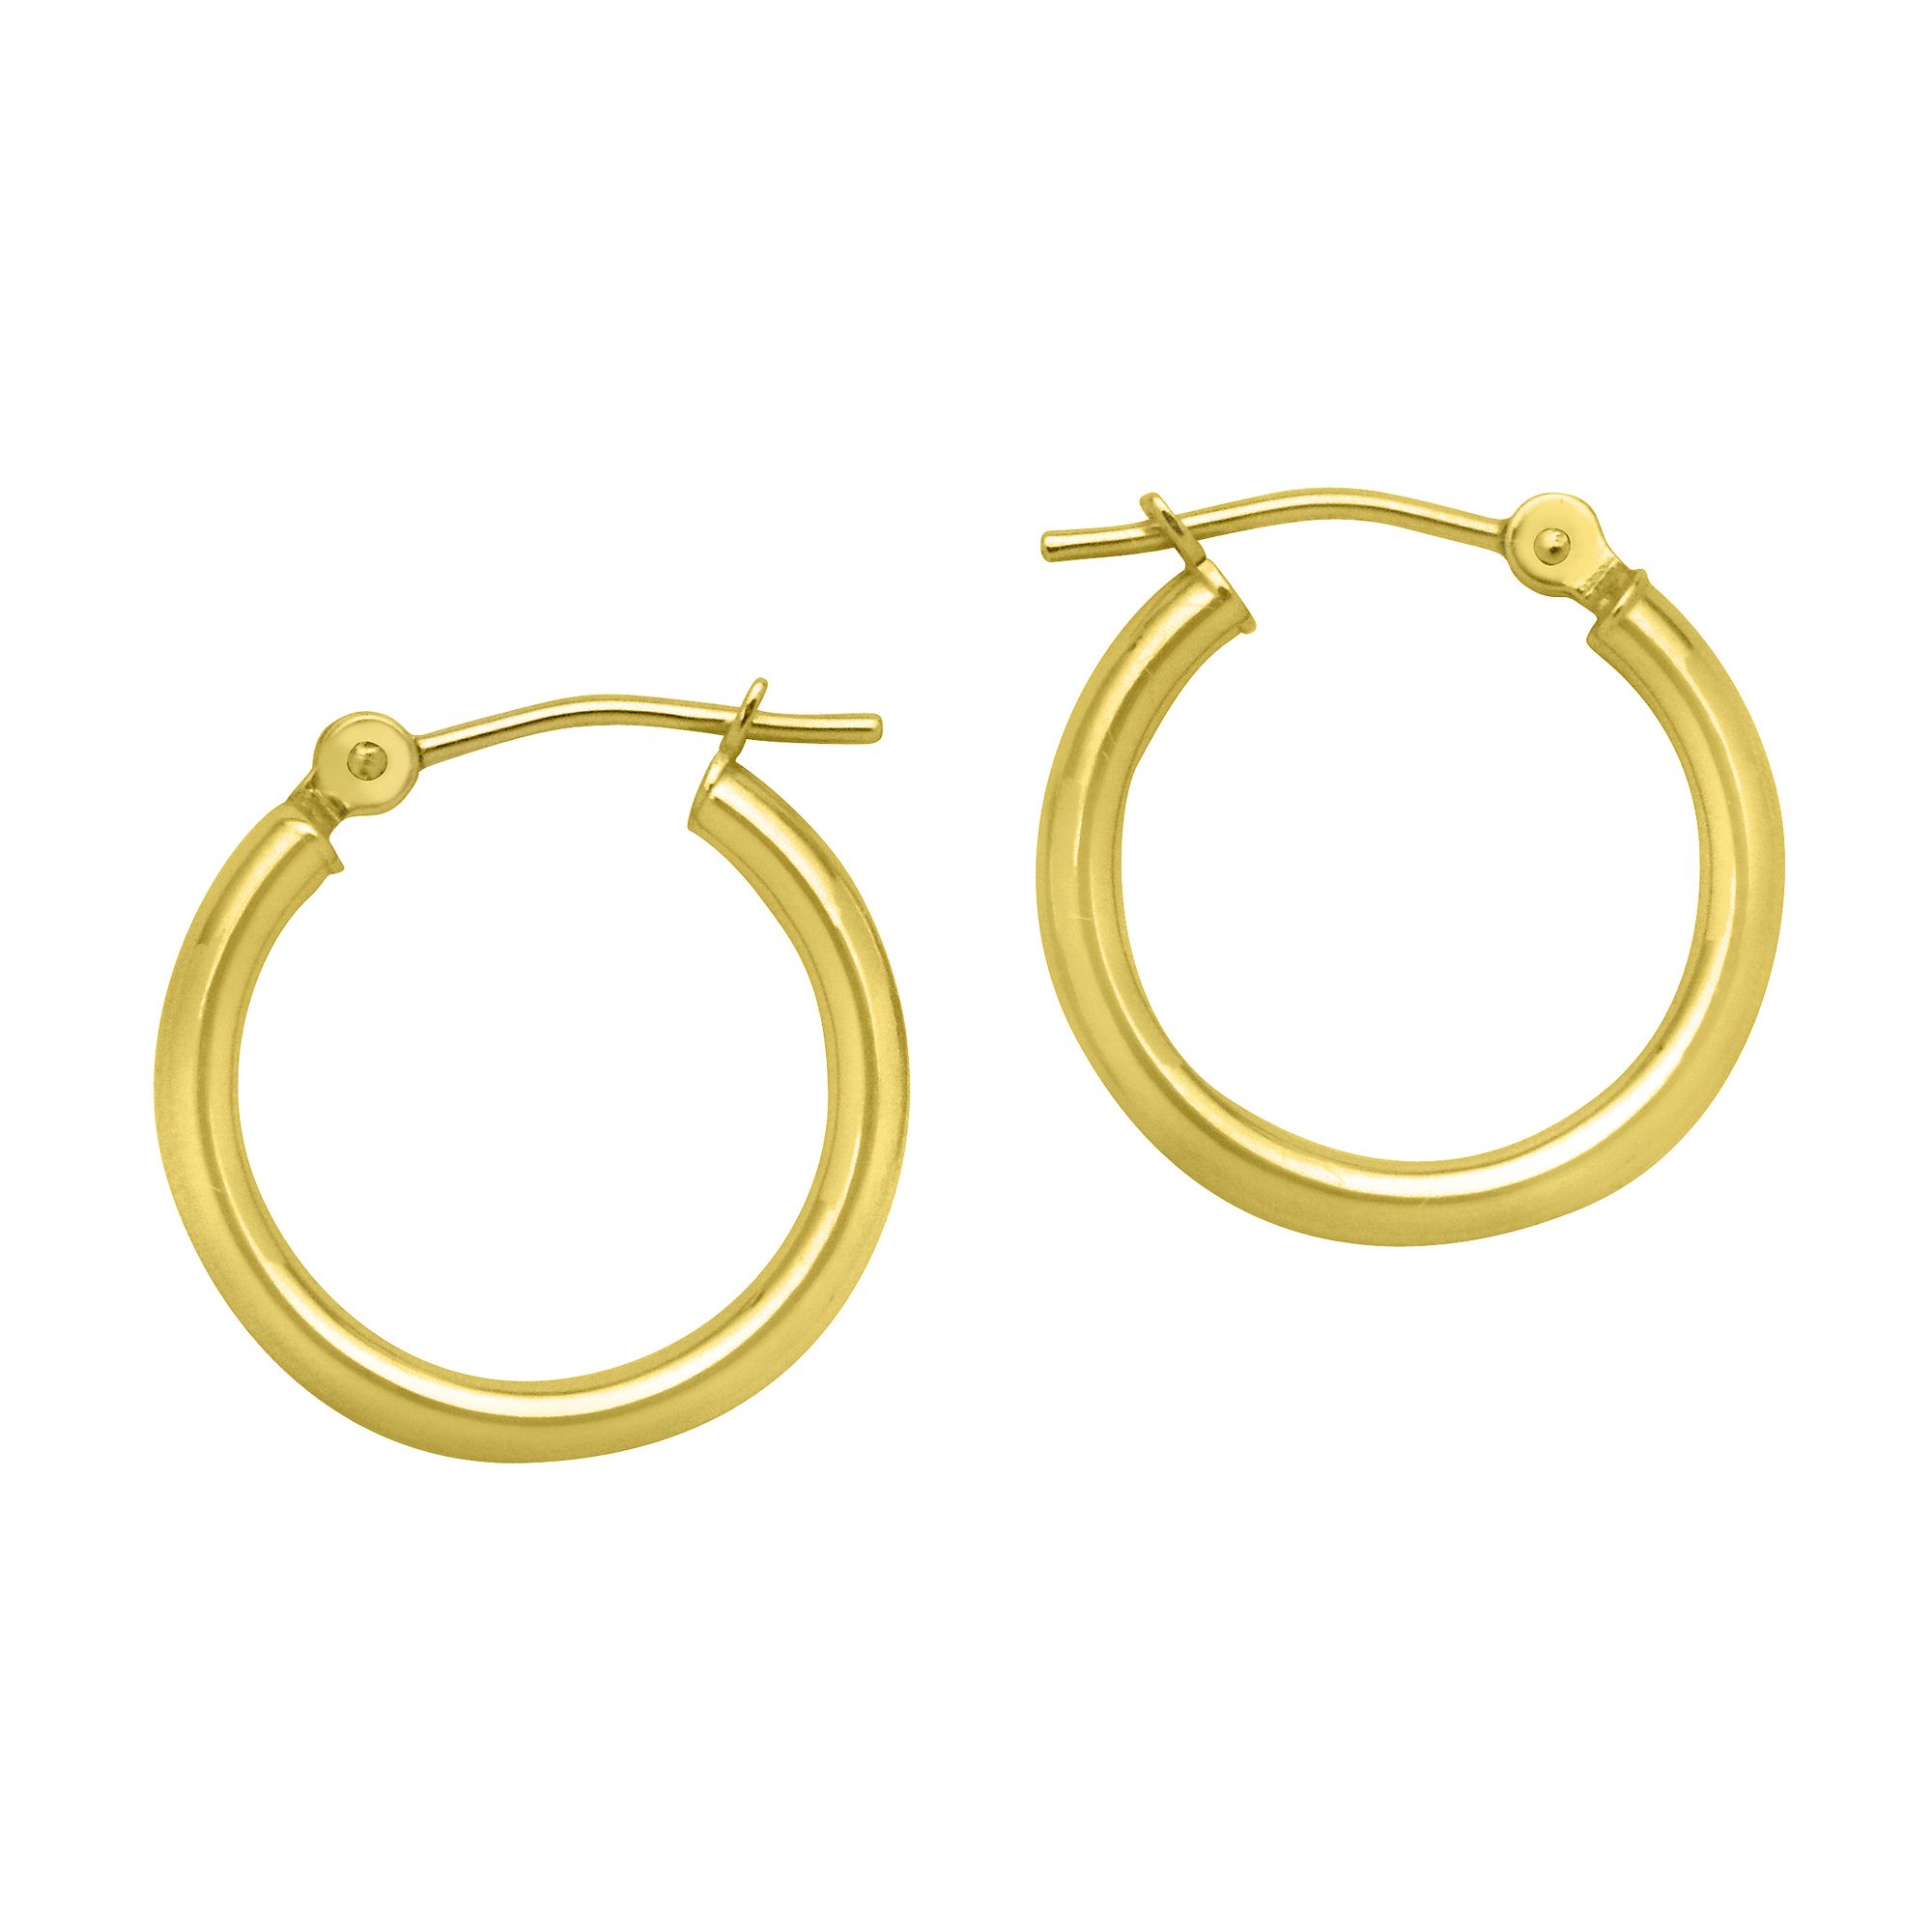 &#178;X16MM Polished Round Earrings 10K Yellow Gold.